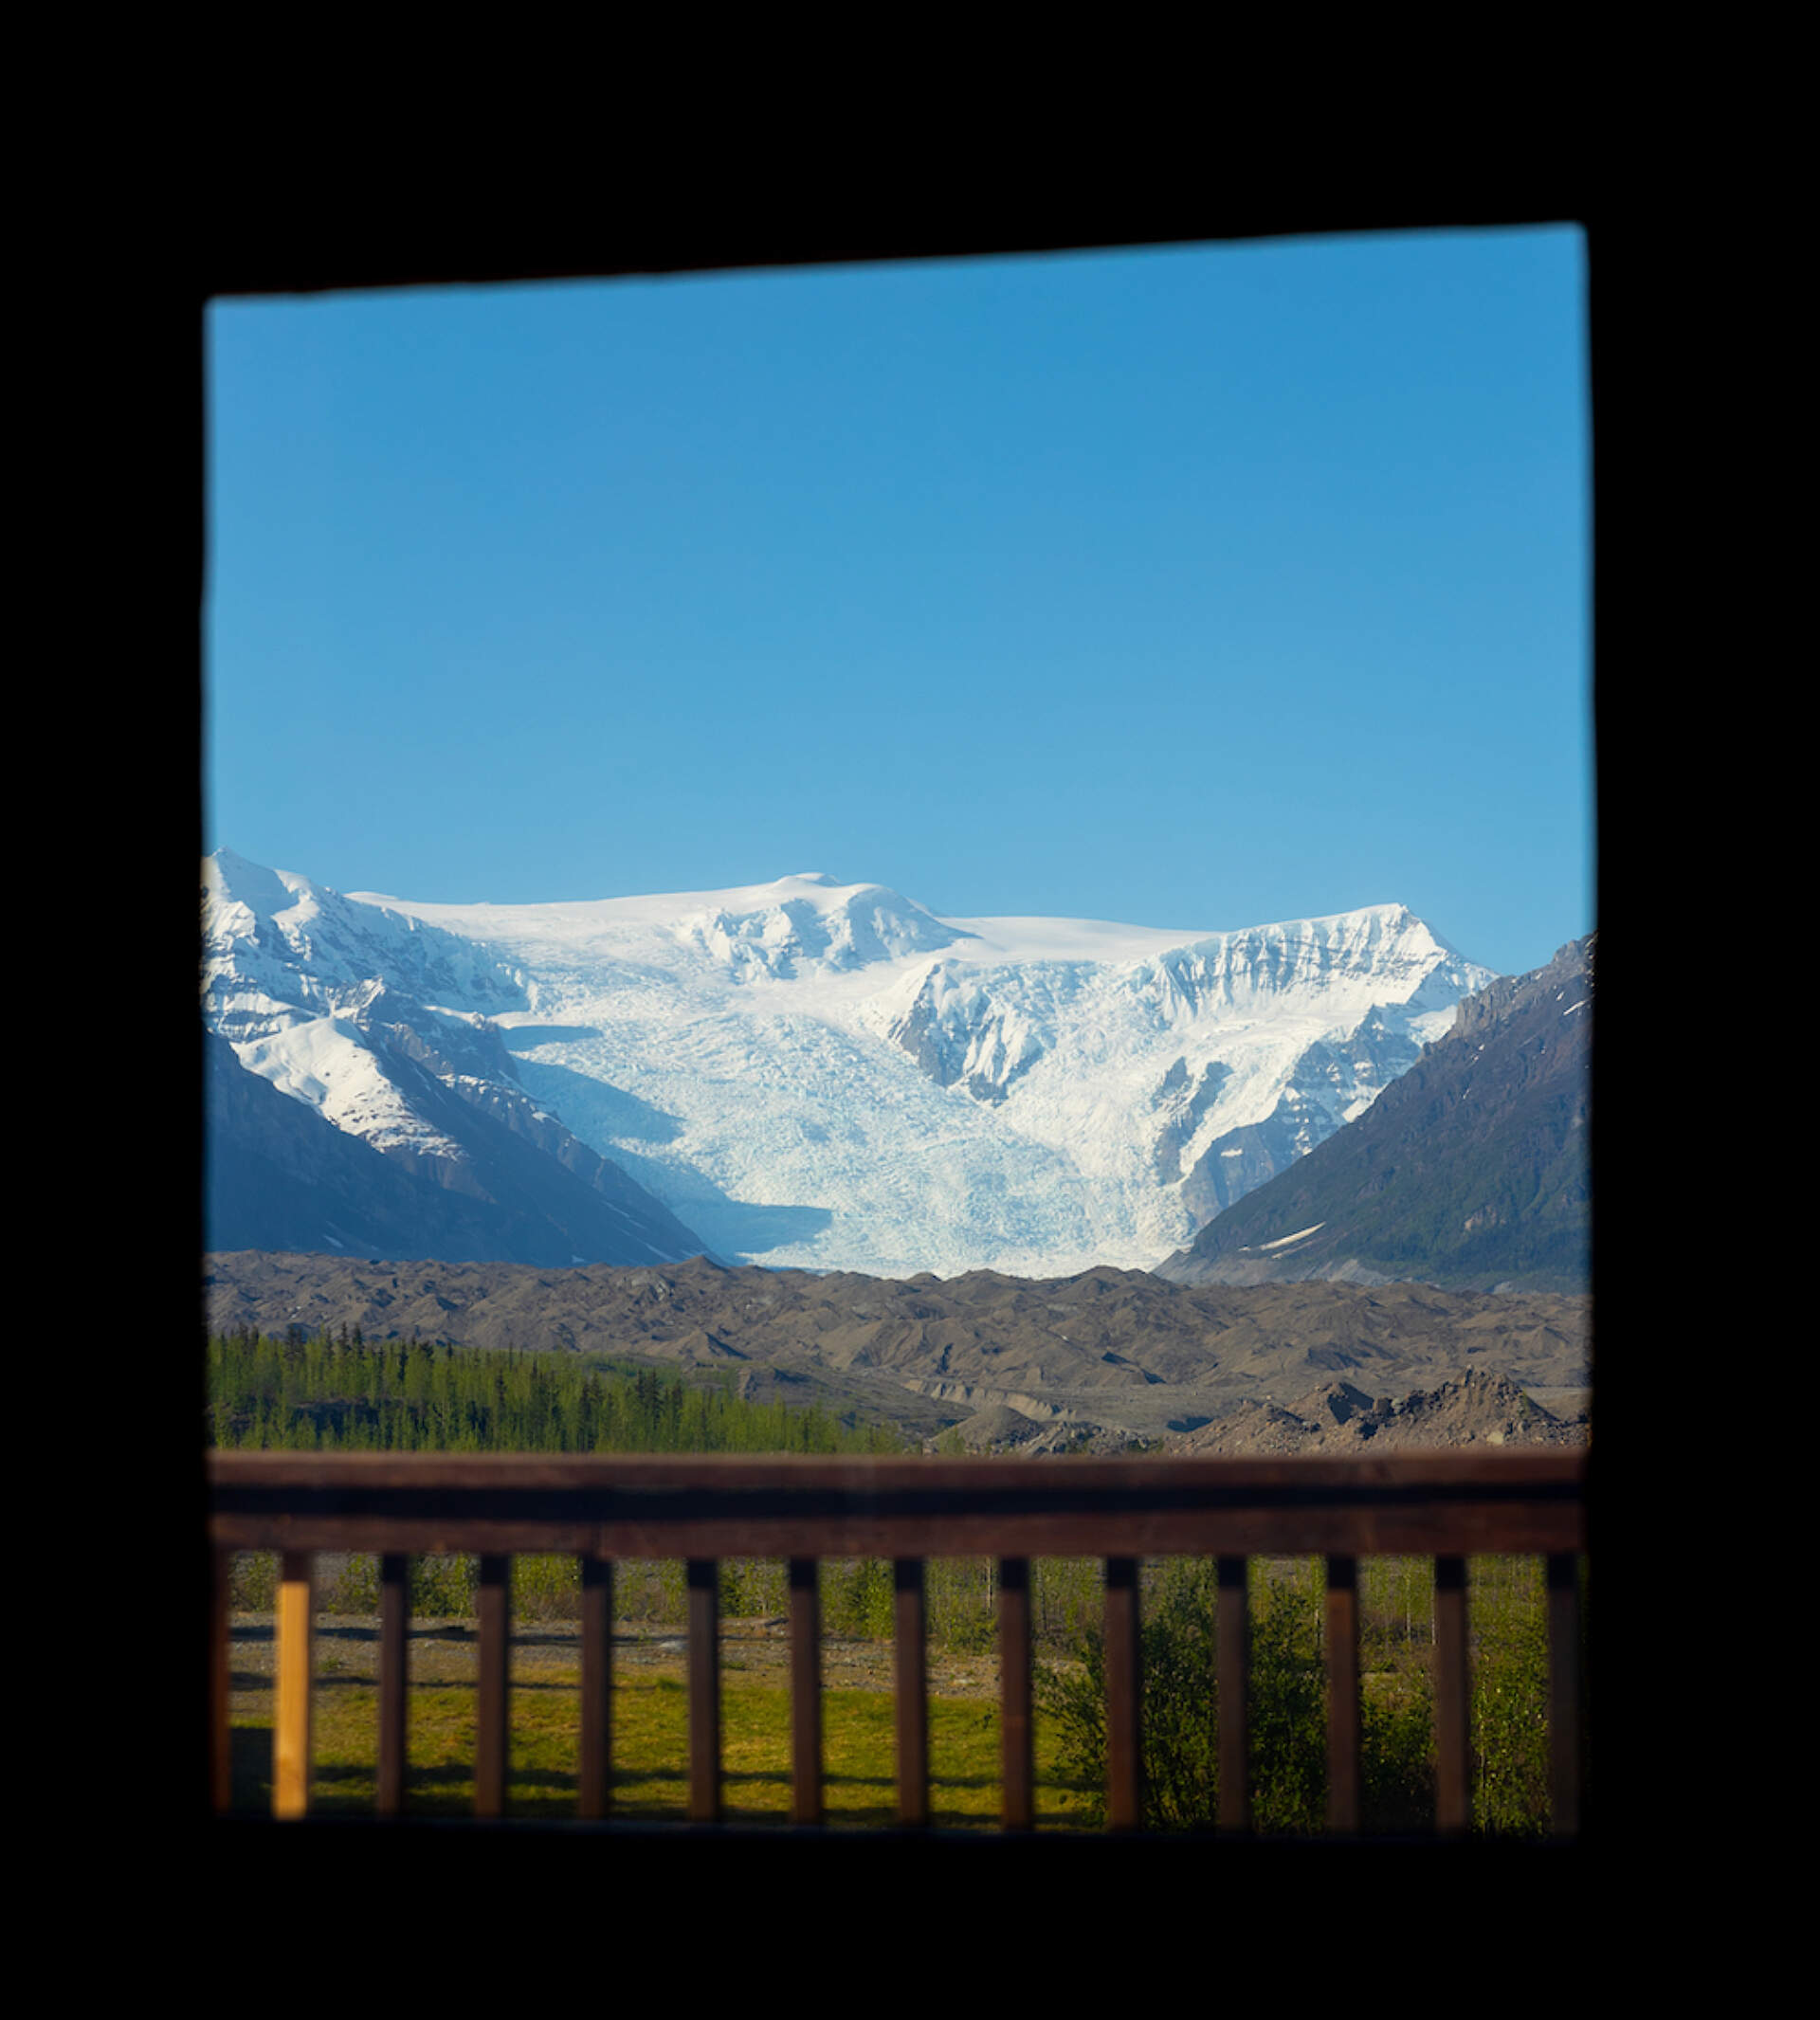 View of the Stairway Icefall from the Suite at the Kennecott River Lodge